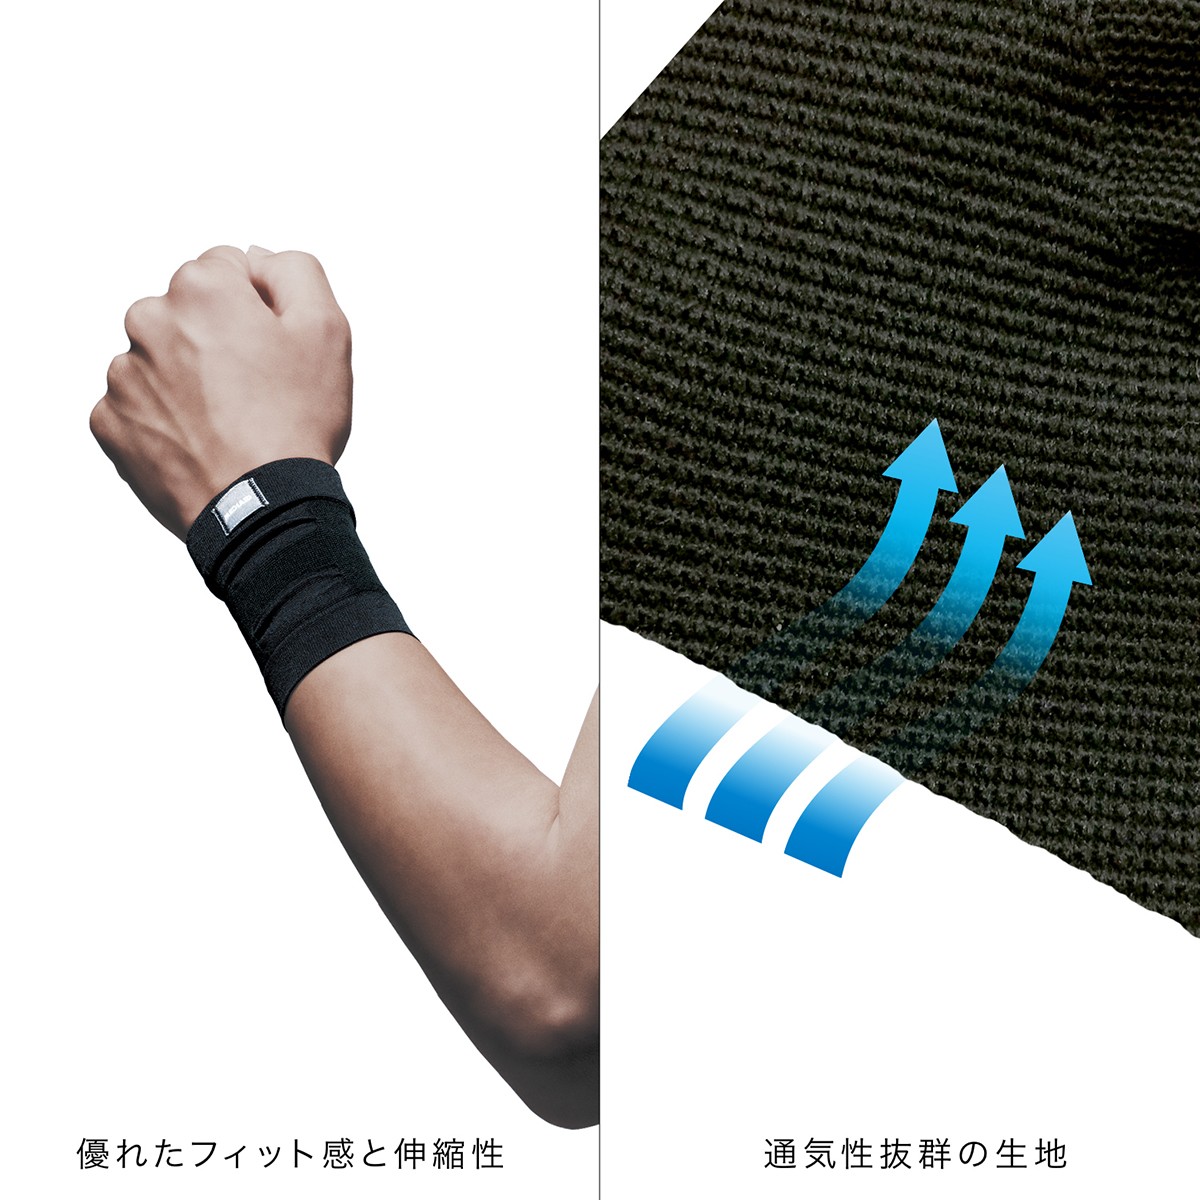 [2 piece set * medical care Manufacturers ] thin type wrist supporter meti aid neat Fit wrist made in Japan .. pain protection medical care for discount both hand laundry possible left right combined use man and woman use 